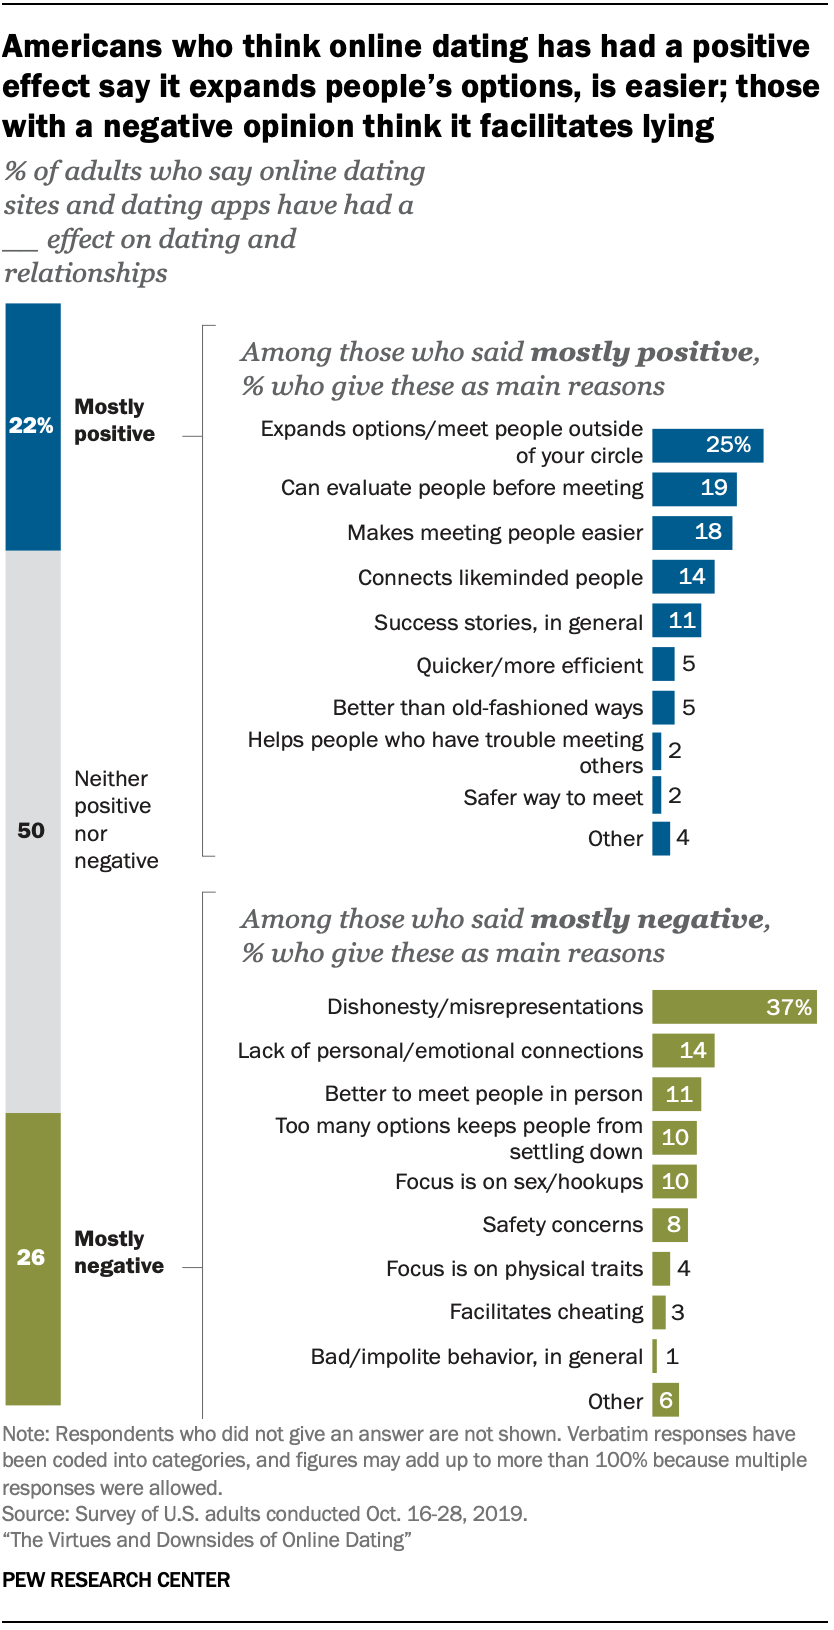 Americans’ opinions about online dating | Pew Research Center